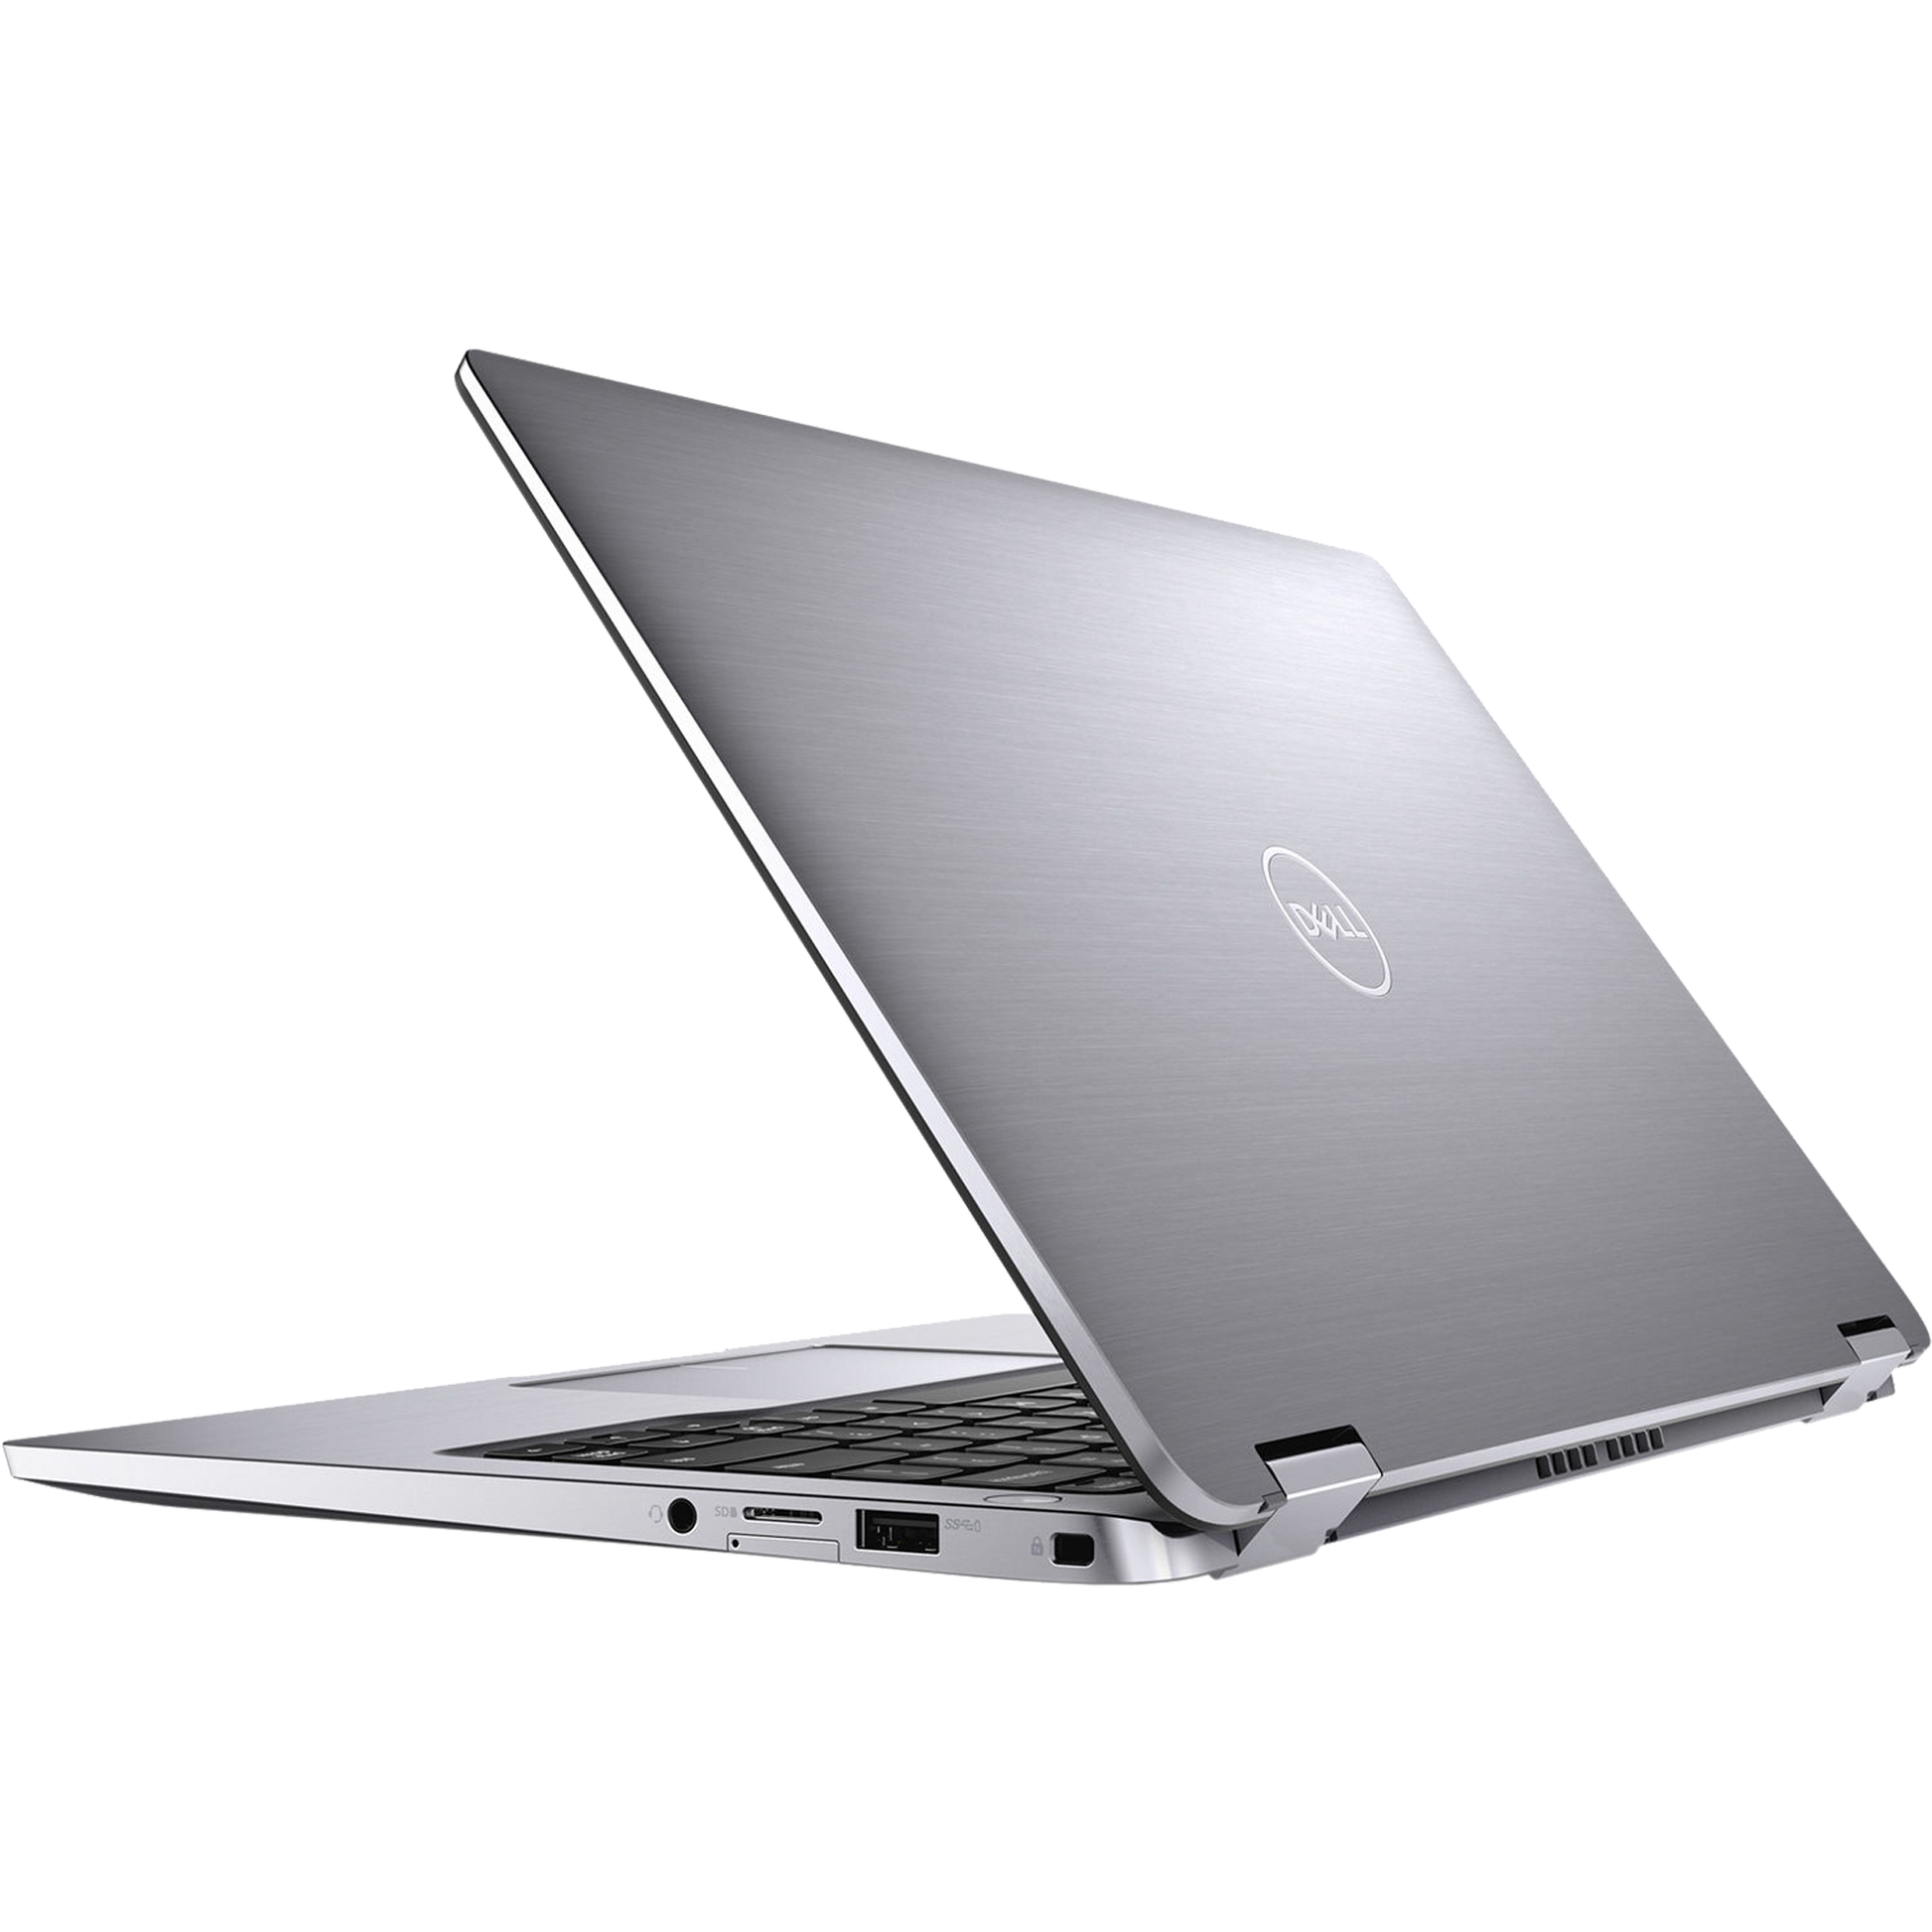 Dell Latitude 7400 2-in-1 Intel i5, 8th Gen Laptop with 16GB Ram Laptops - Refurbished